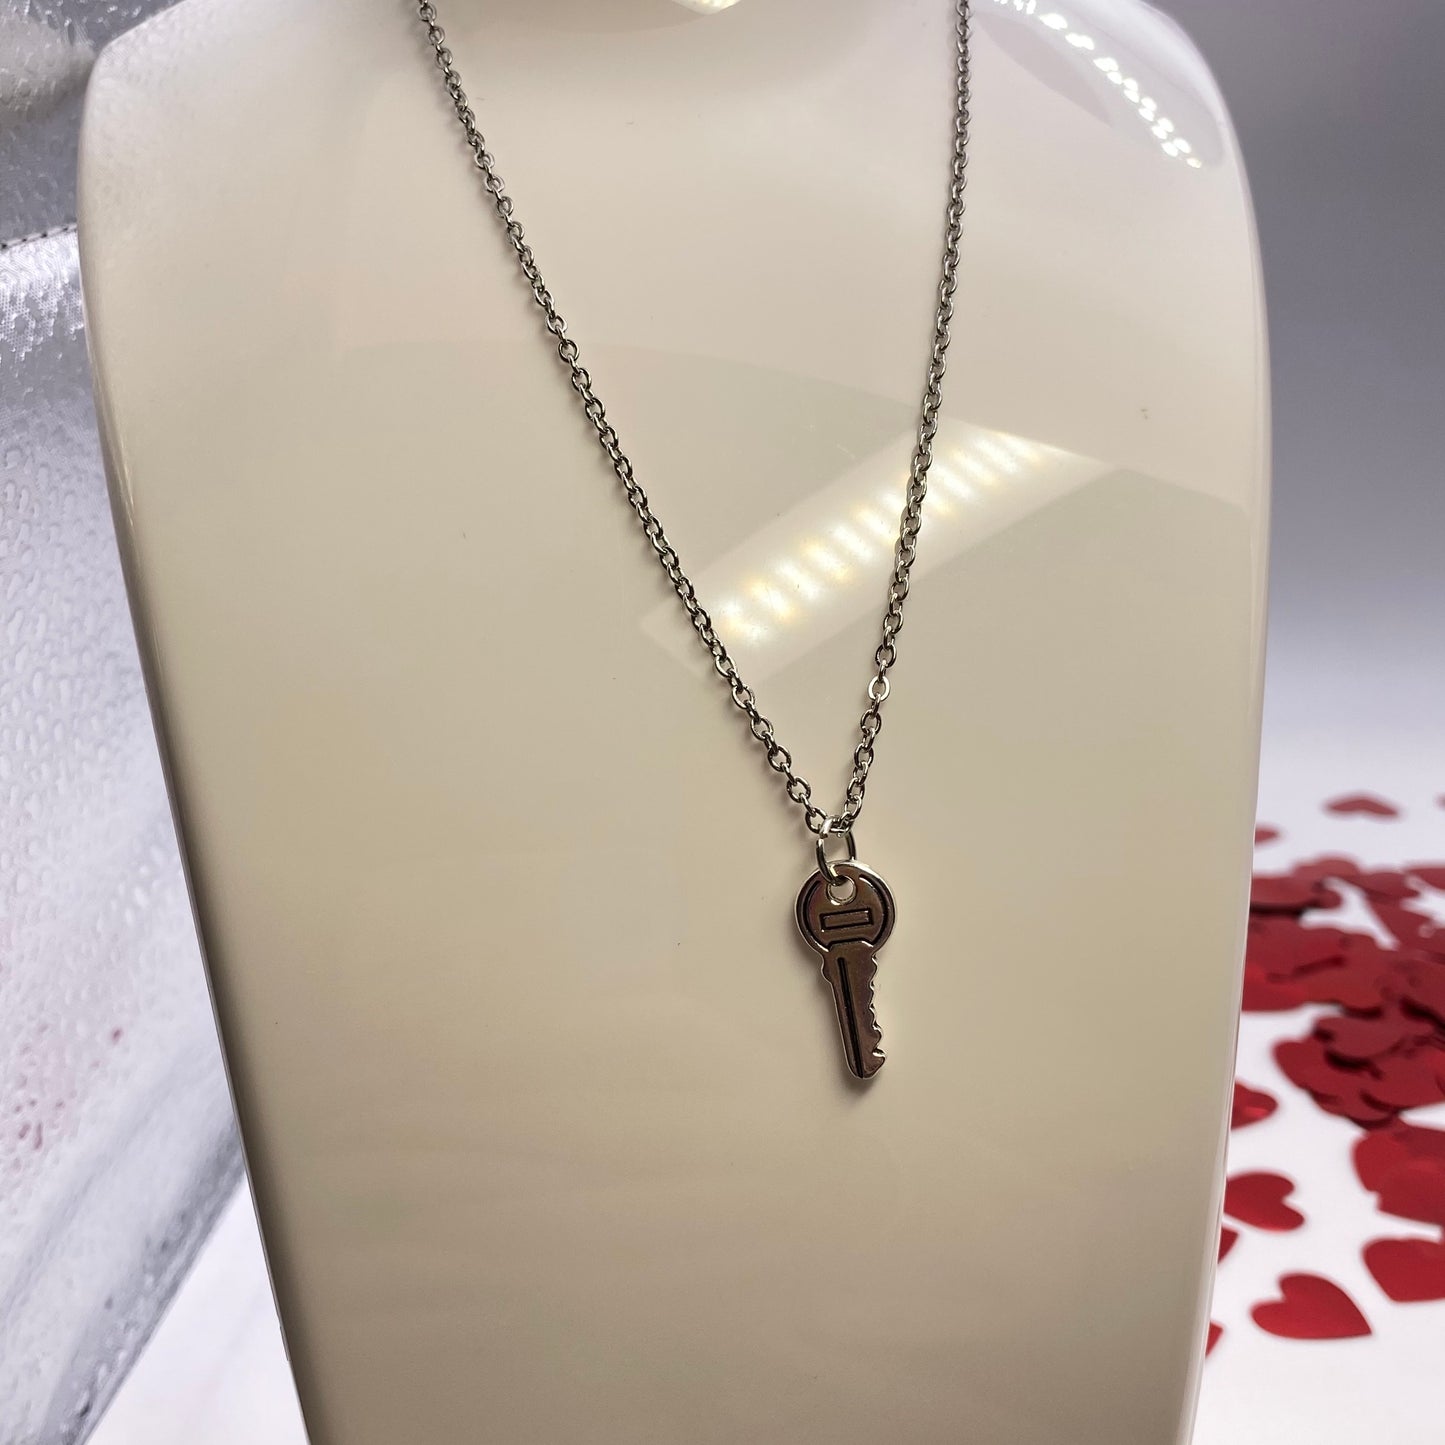 Matching Heart Lock and Key Necklace